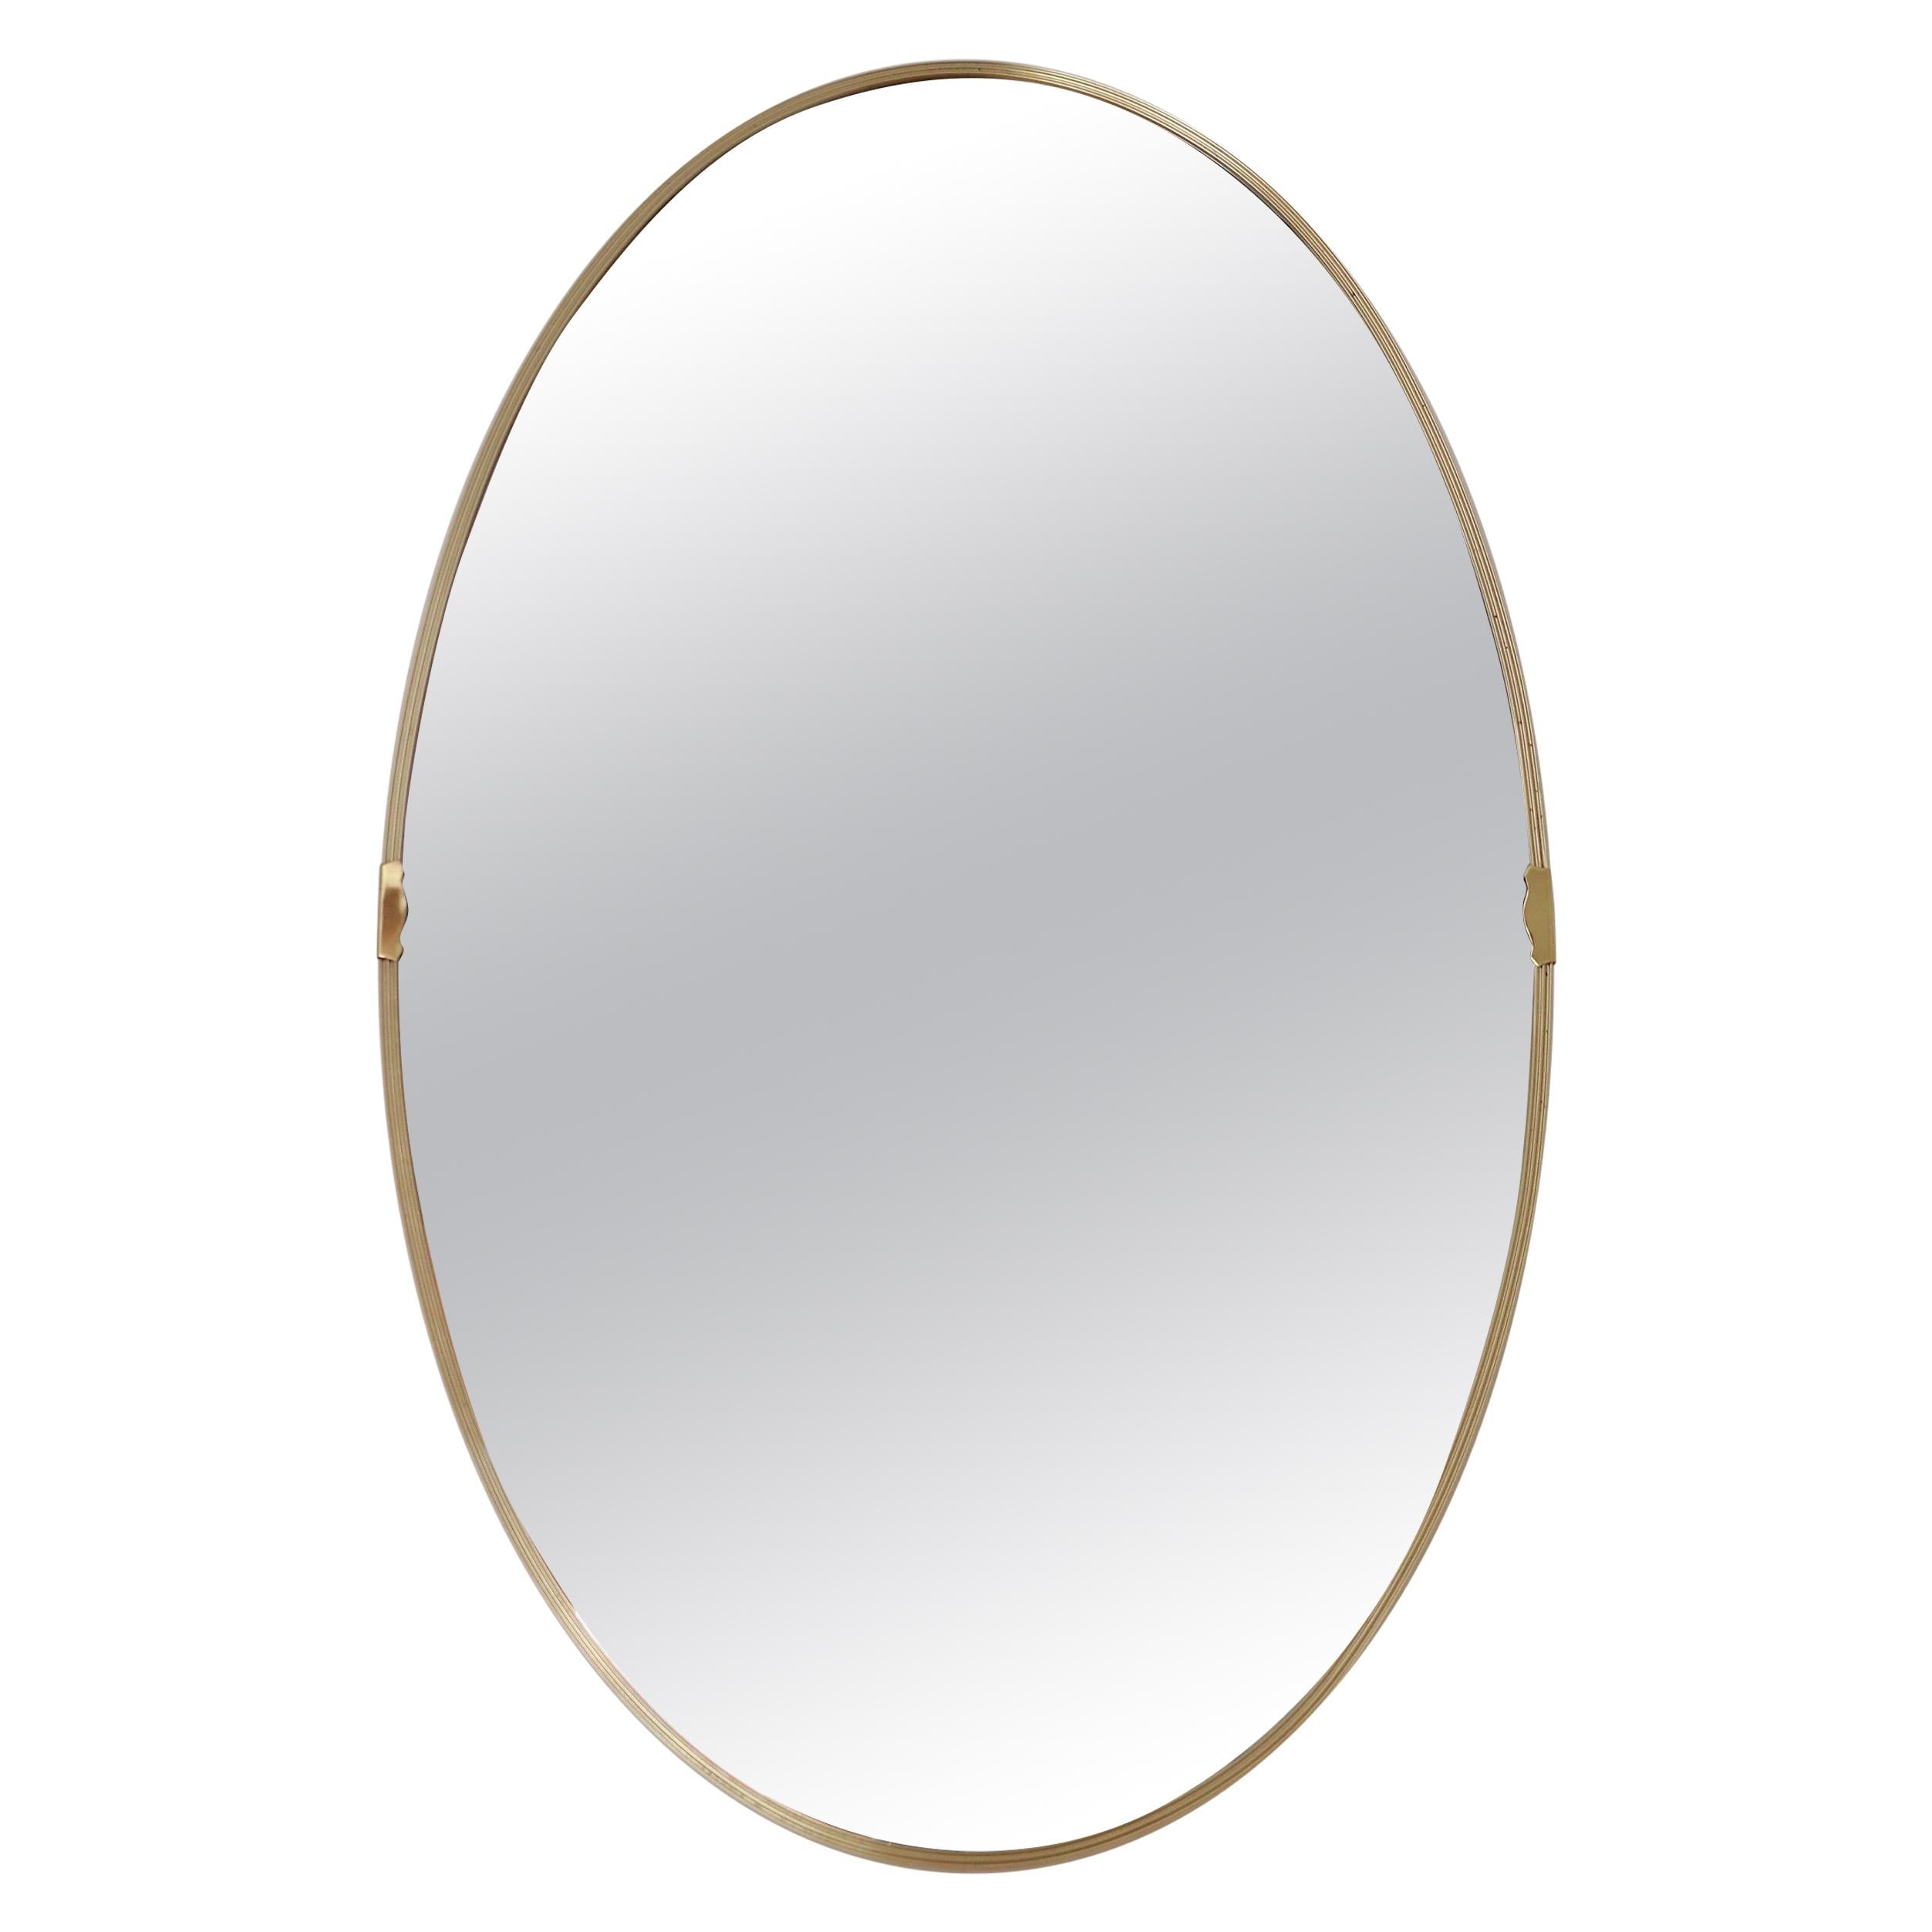 Italian Midcentury Oval Wall Mirror with Golden Frame and Brass Details, 1960